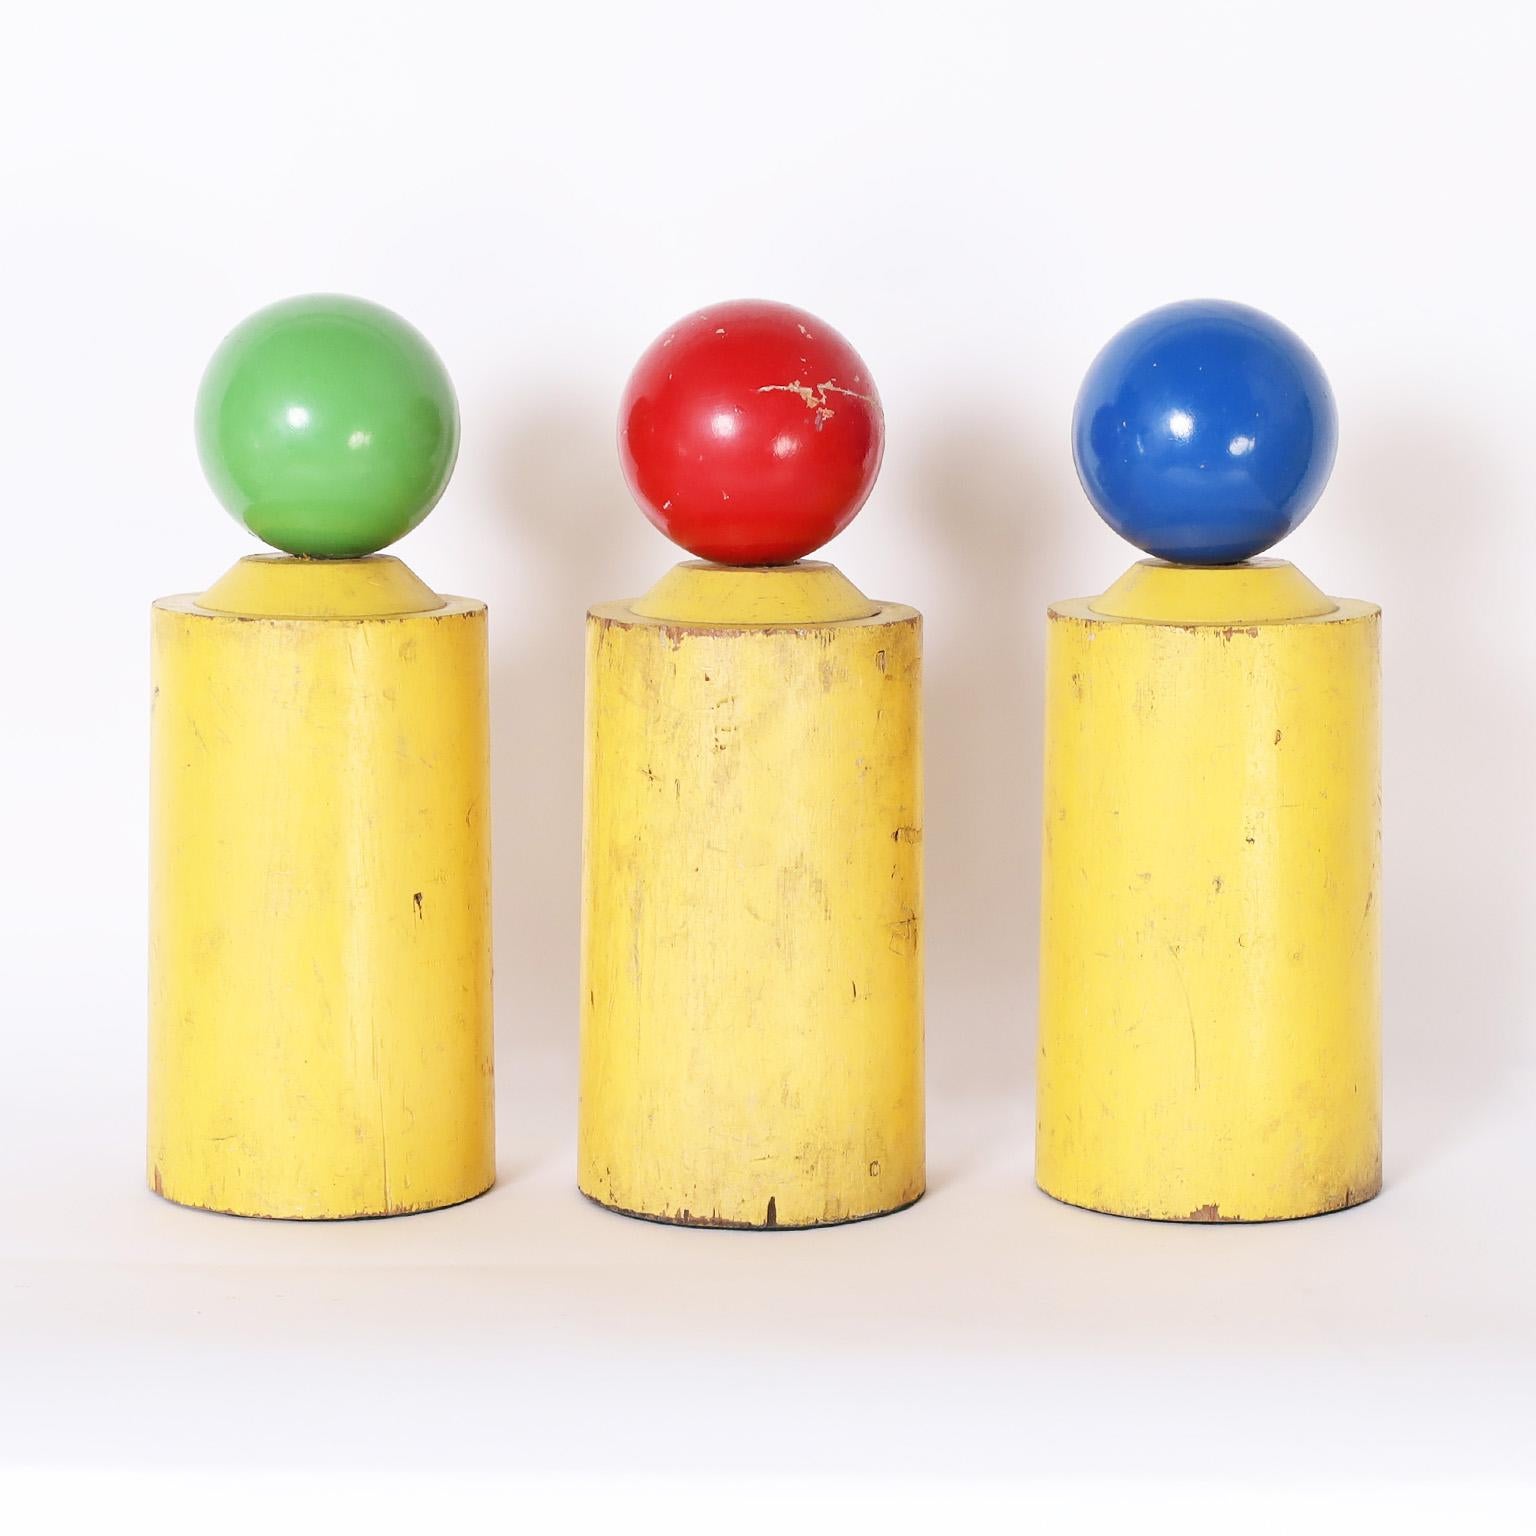 Intriguing group of three vintage decorative markers crafted in wood and painted with primary colors, now distressed.